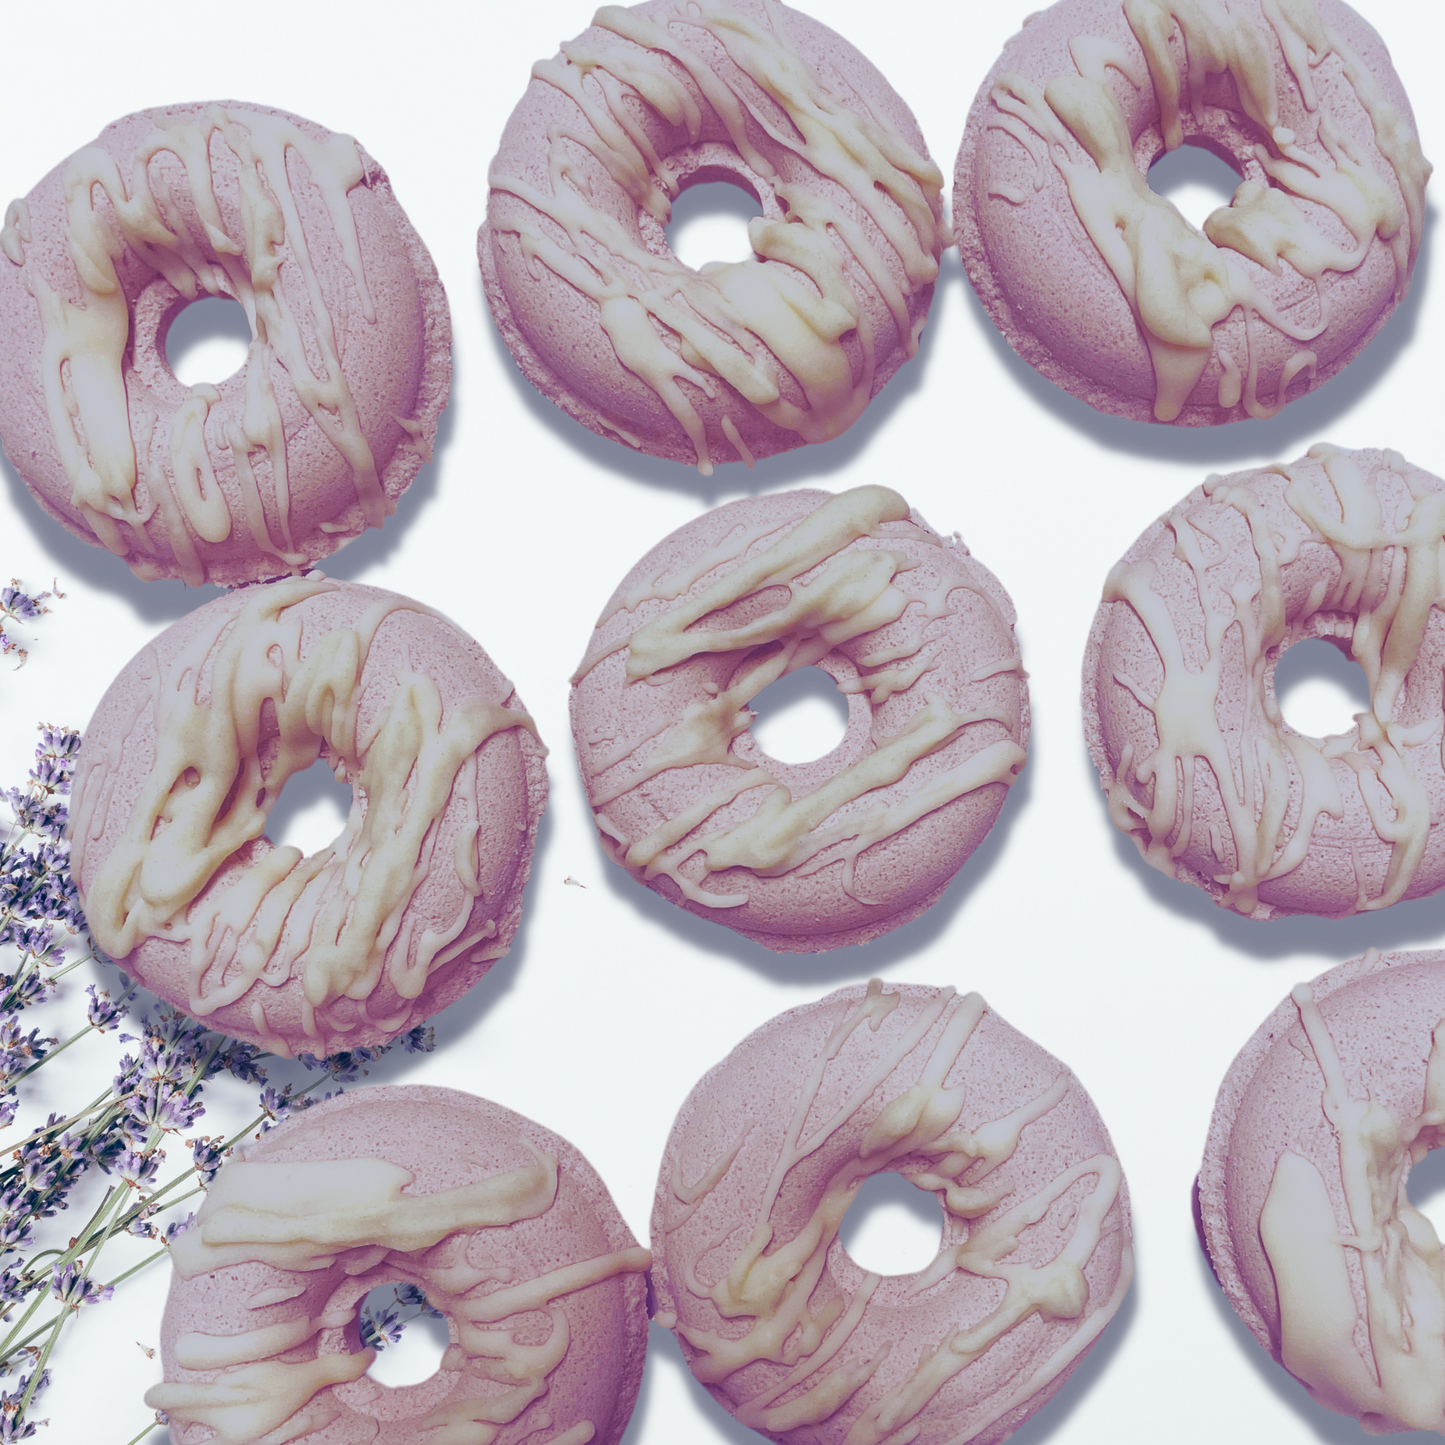 Lavender Field Donut Bath Bomb- Farmhouse Charm is made with plant-based ingredients and infused only with essential oils. This bath bomb uses Kaolin clay for color and contains moisturizing ingredients such as coconut oil, cocoa butter, and colloidal oatmeal. It does not contain any artificial colorants and fragrance. To Use: Drop or hold in bath water. Enjoy the fizzing action, wonderful aromas and nourishing oils.